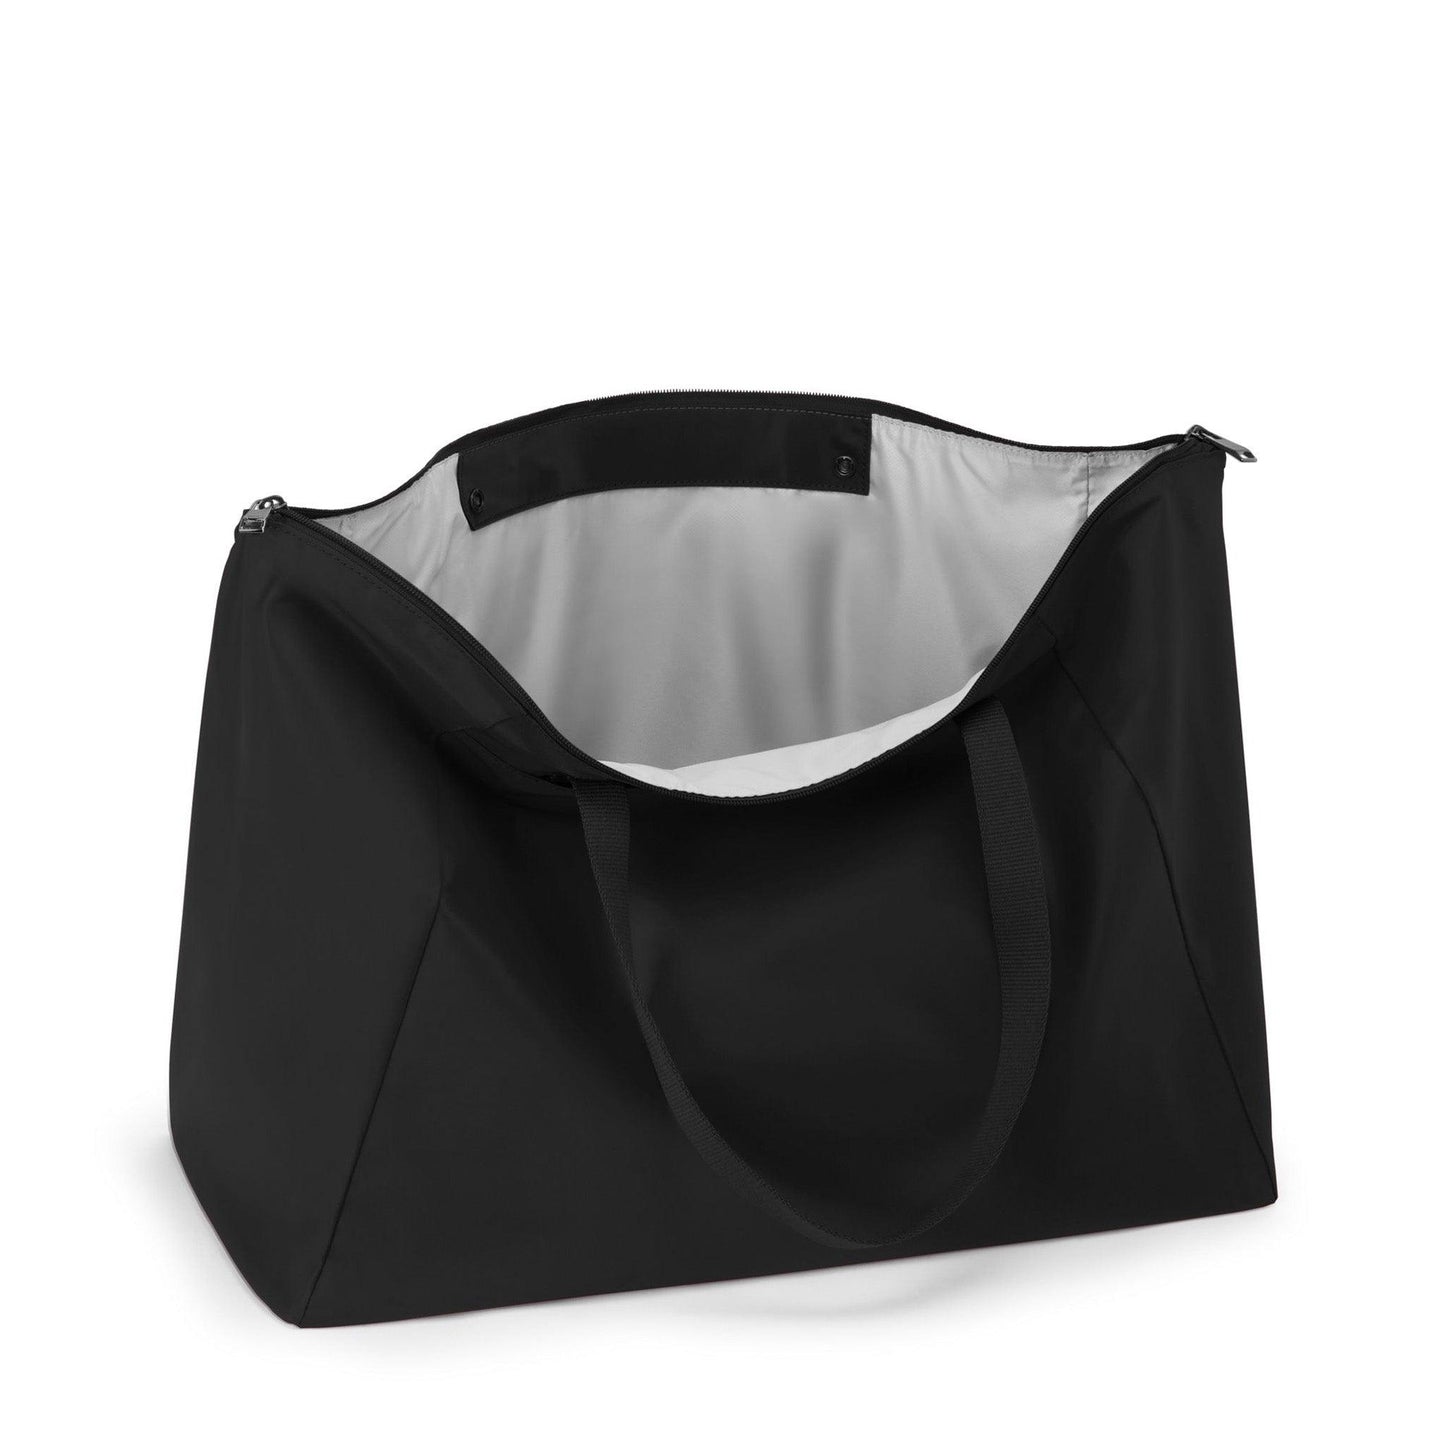 Just In Case® Tote - Black/Gunmetal - Cosmos Boutique New Jersey